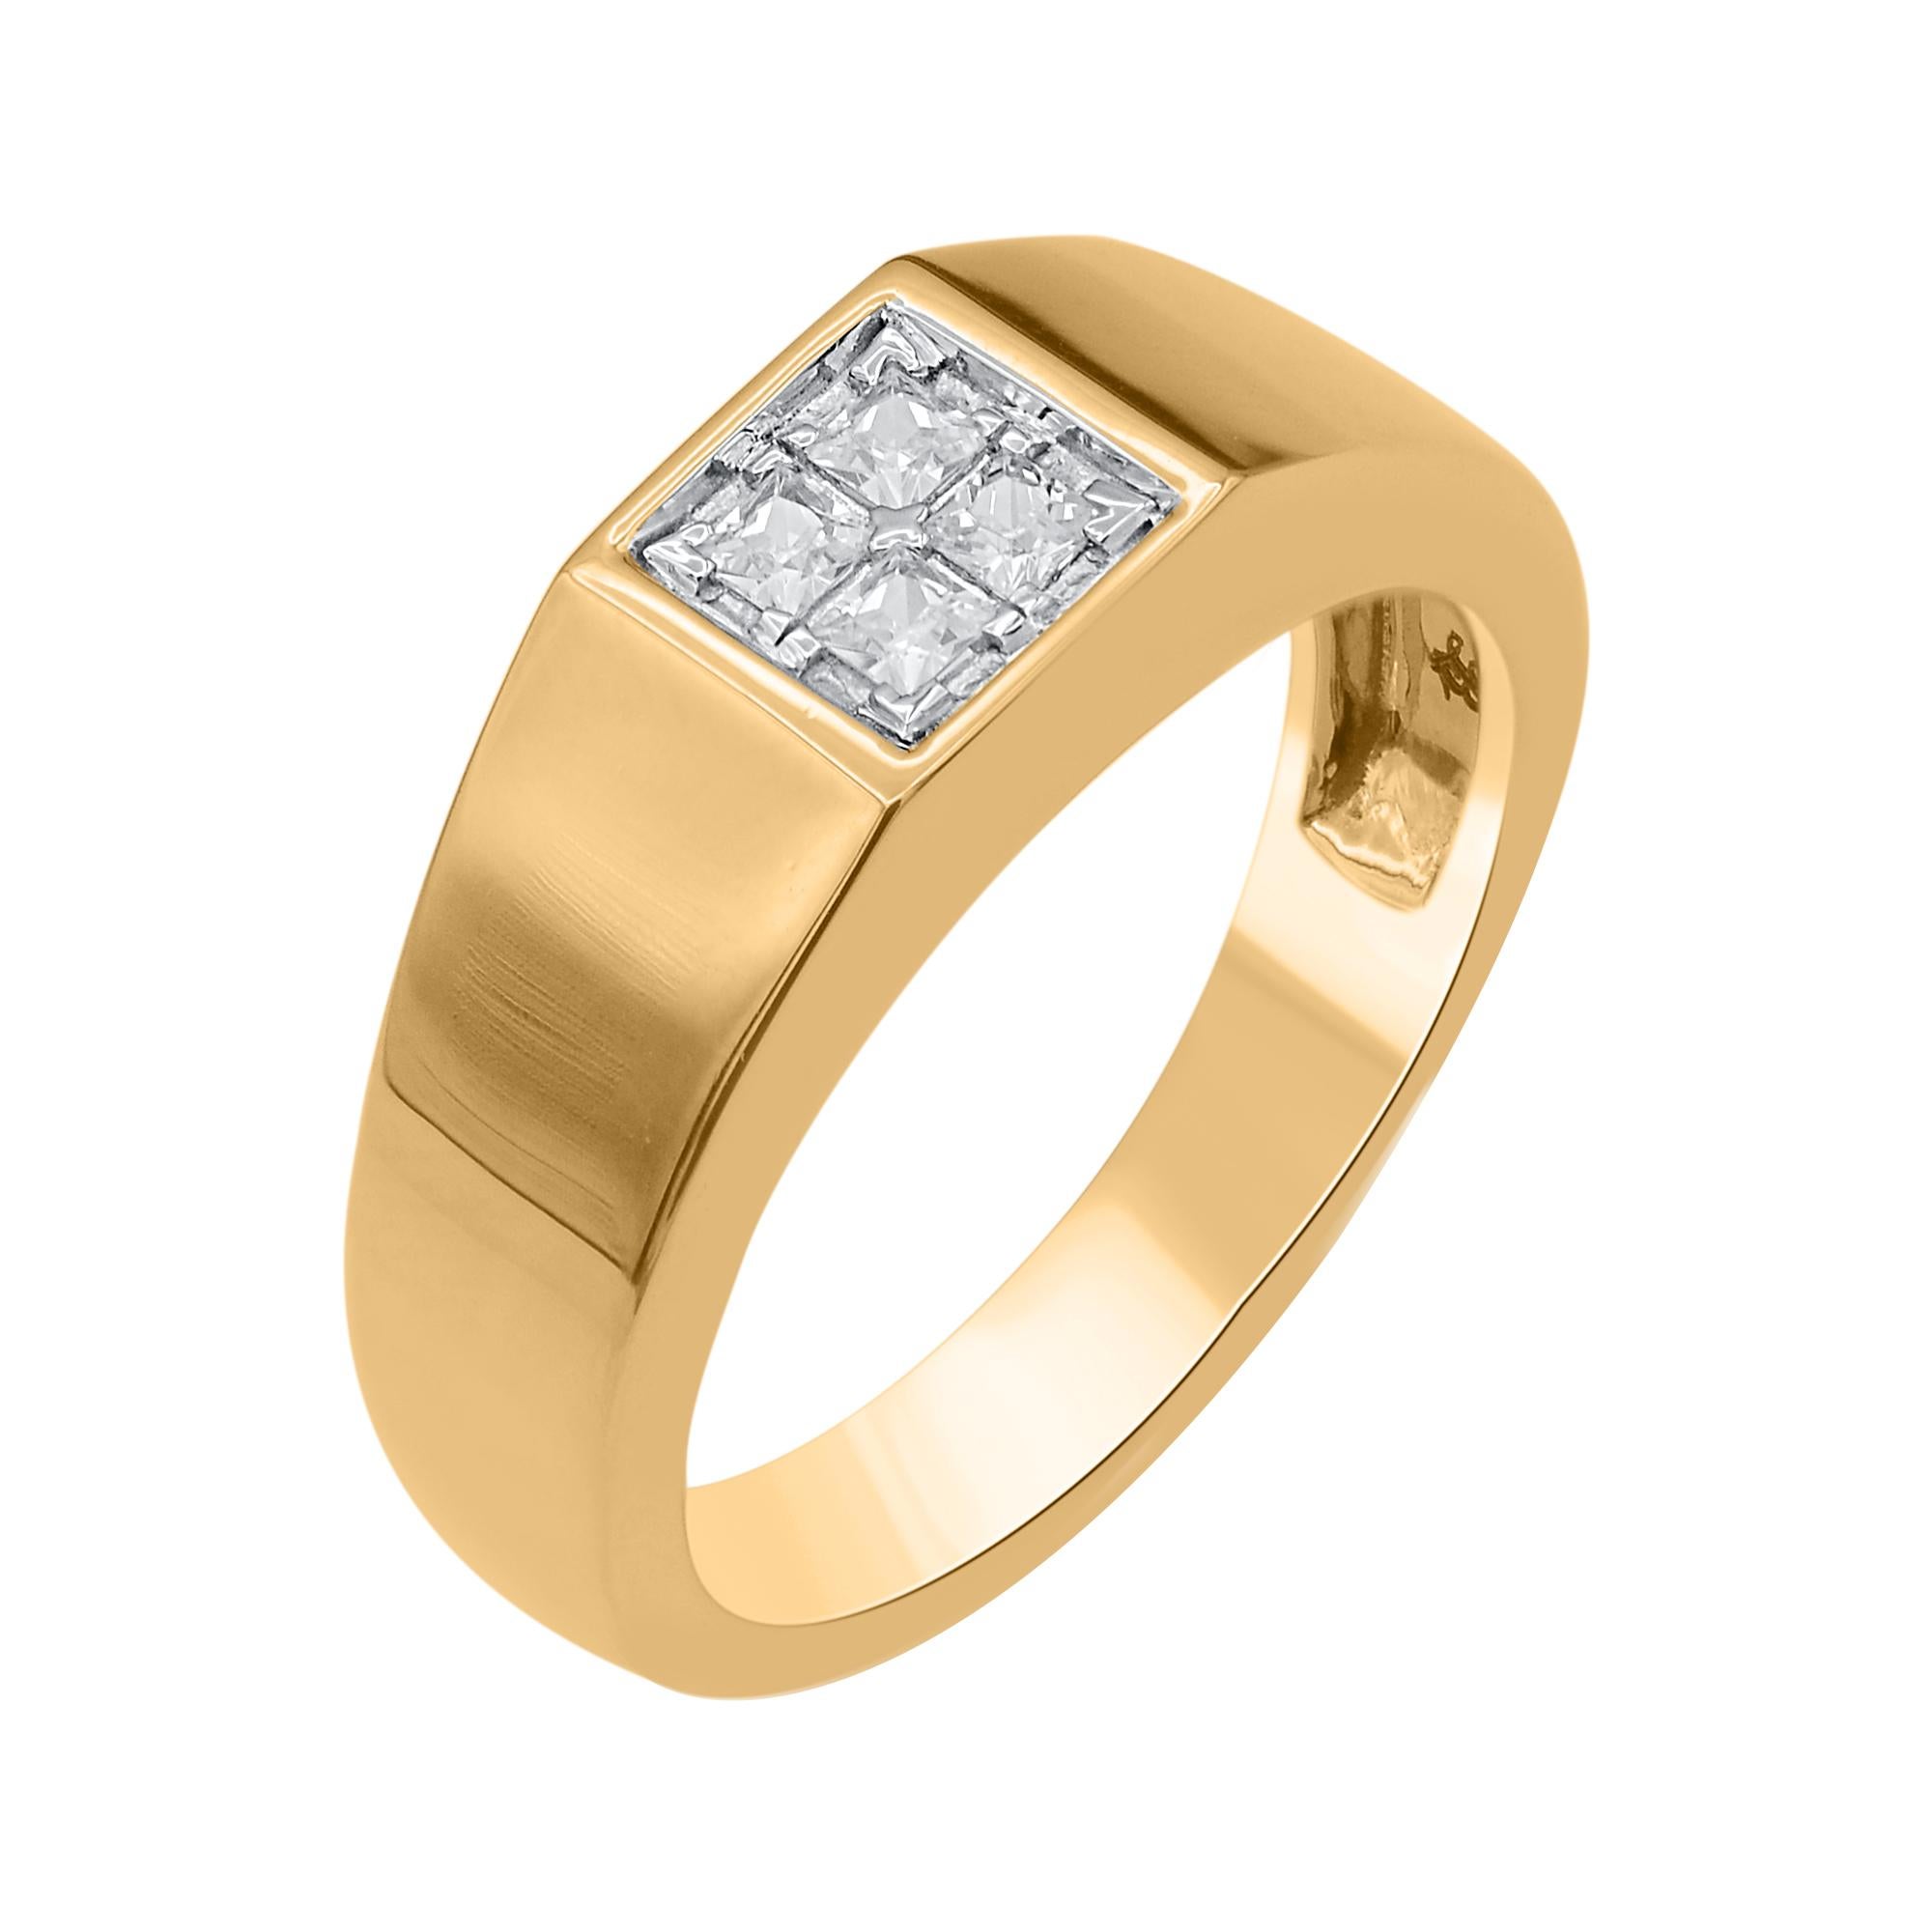 Elevate your sophisticated style when you wear this men's diamond band ring in 18KT yellow gold. These band ring are studded with 4 princess Cut natural diamonds in 0.30 carat. The white diamonds are graded as H-I color and I-2 clarity.